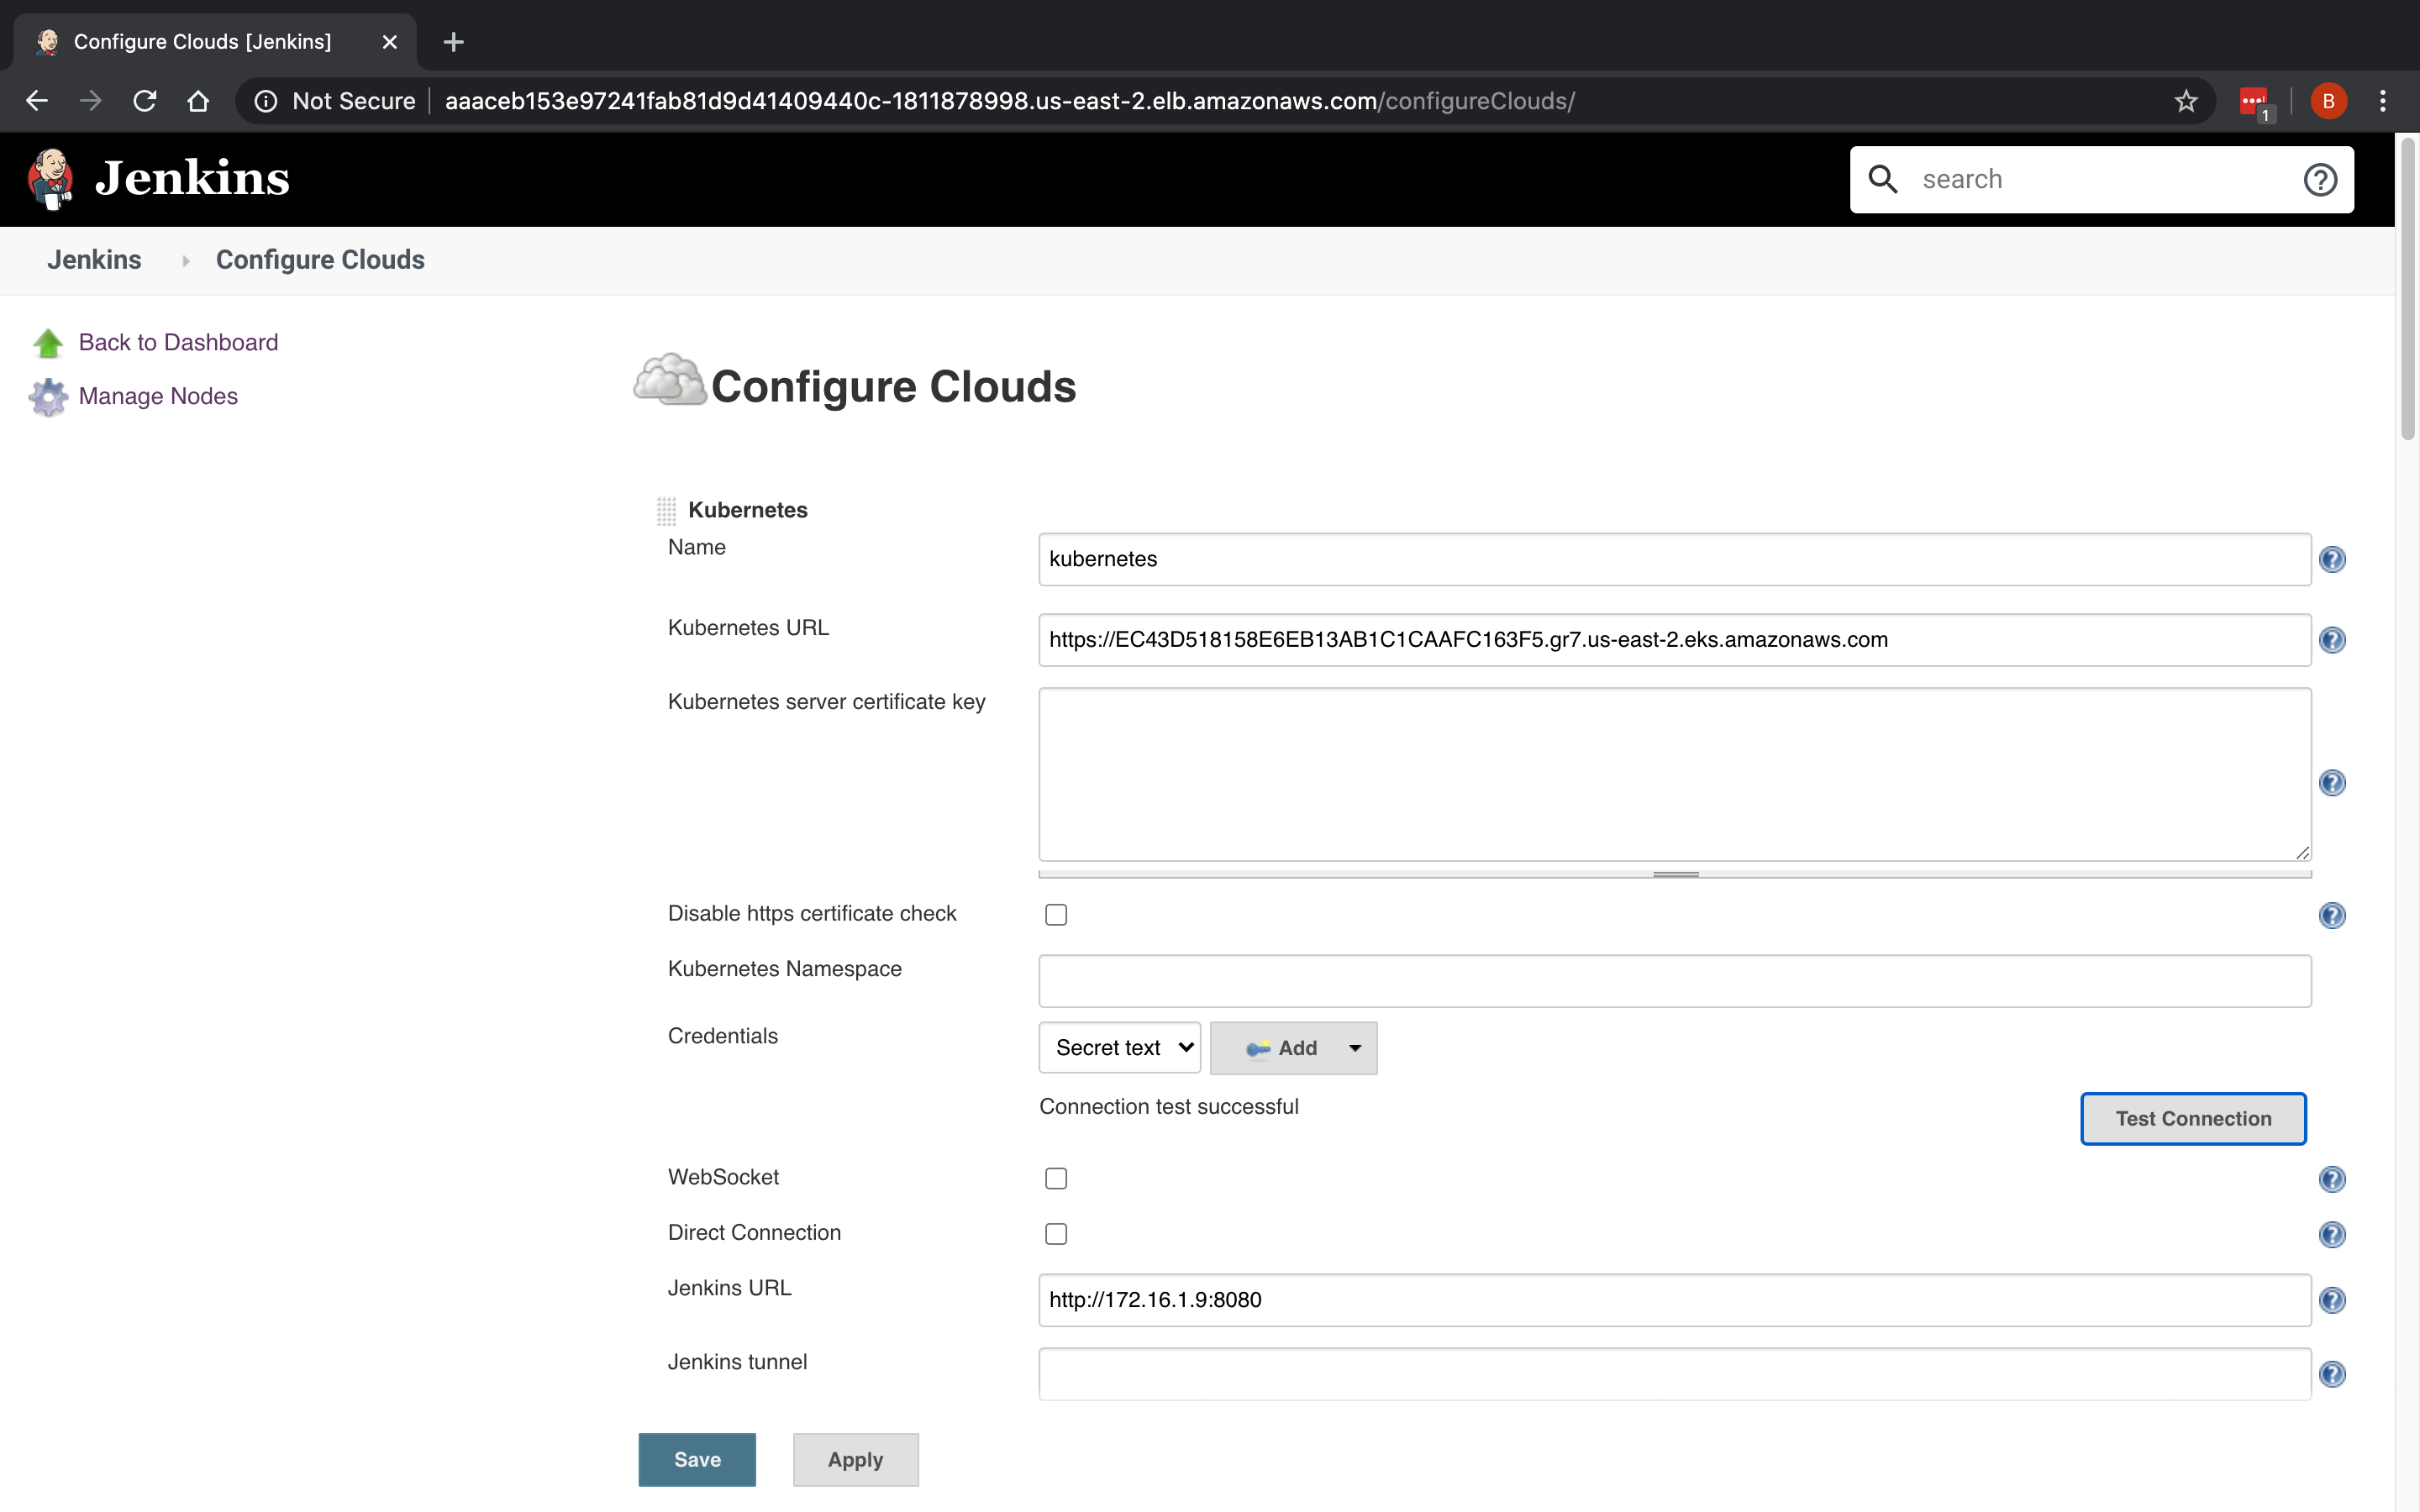 Integrating Anchore vulnerability scanning and compliance with Jenkins